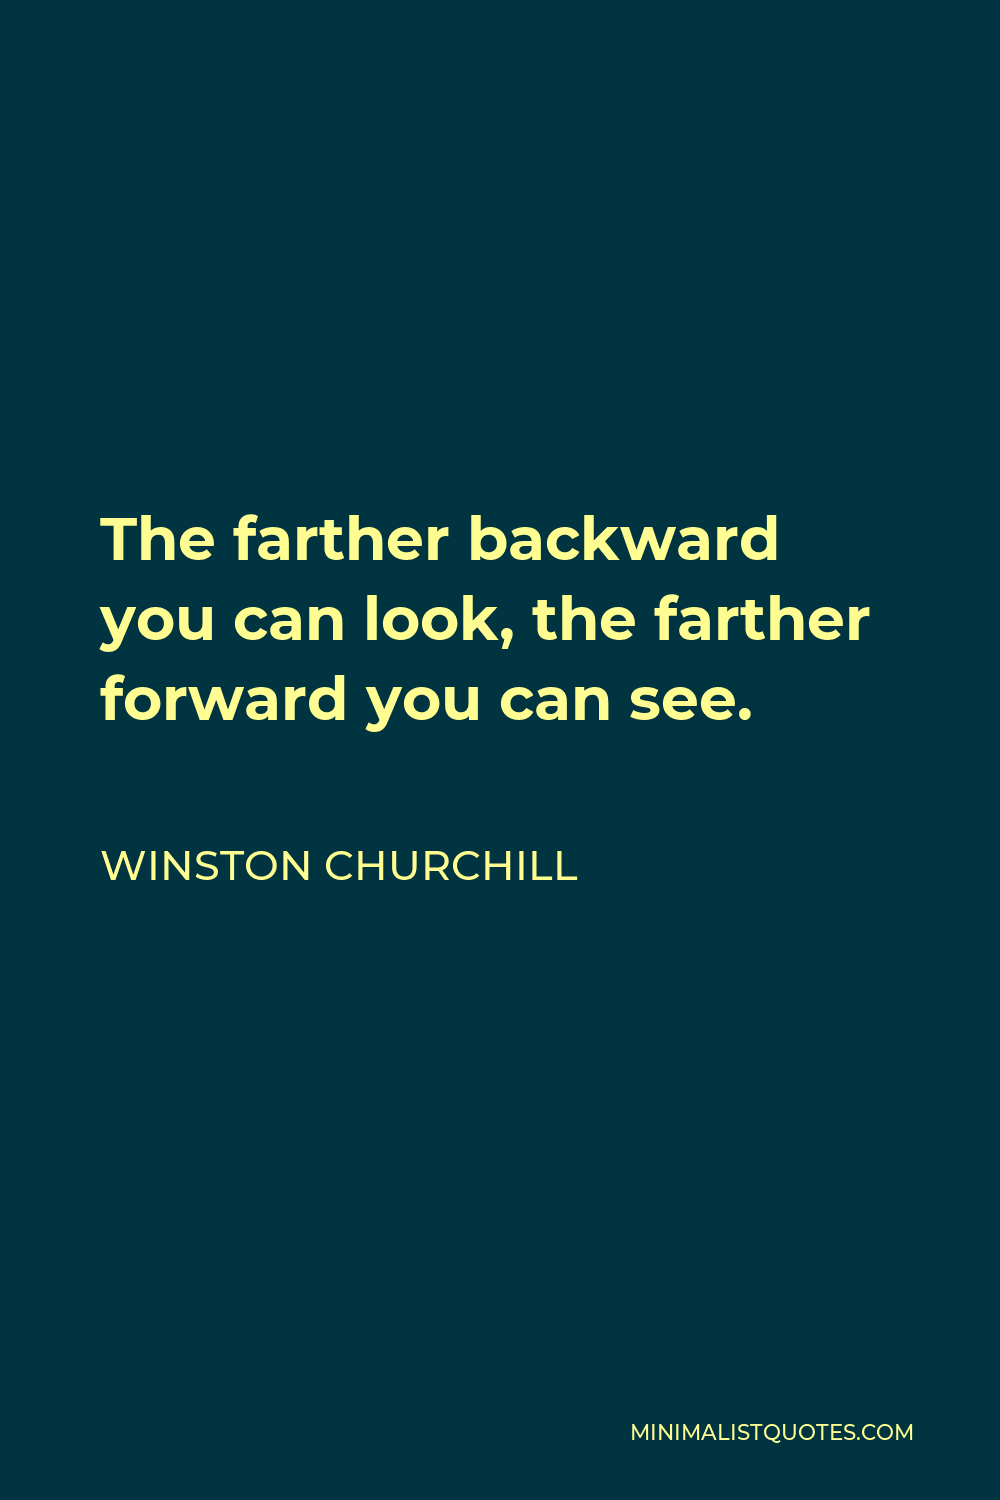 Winston Churchill Quote - The farther backward you can look, the farther forward you can see.